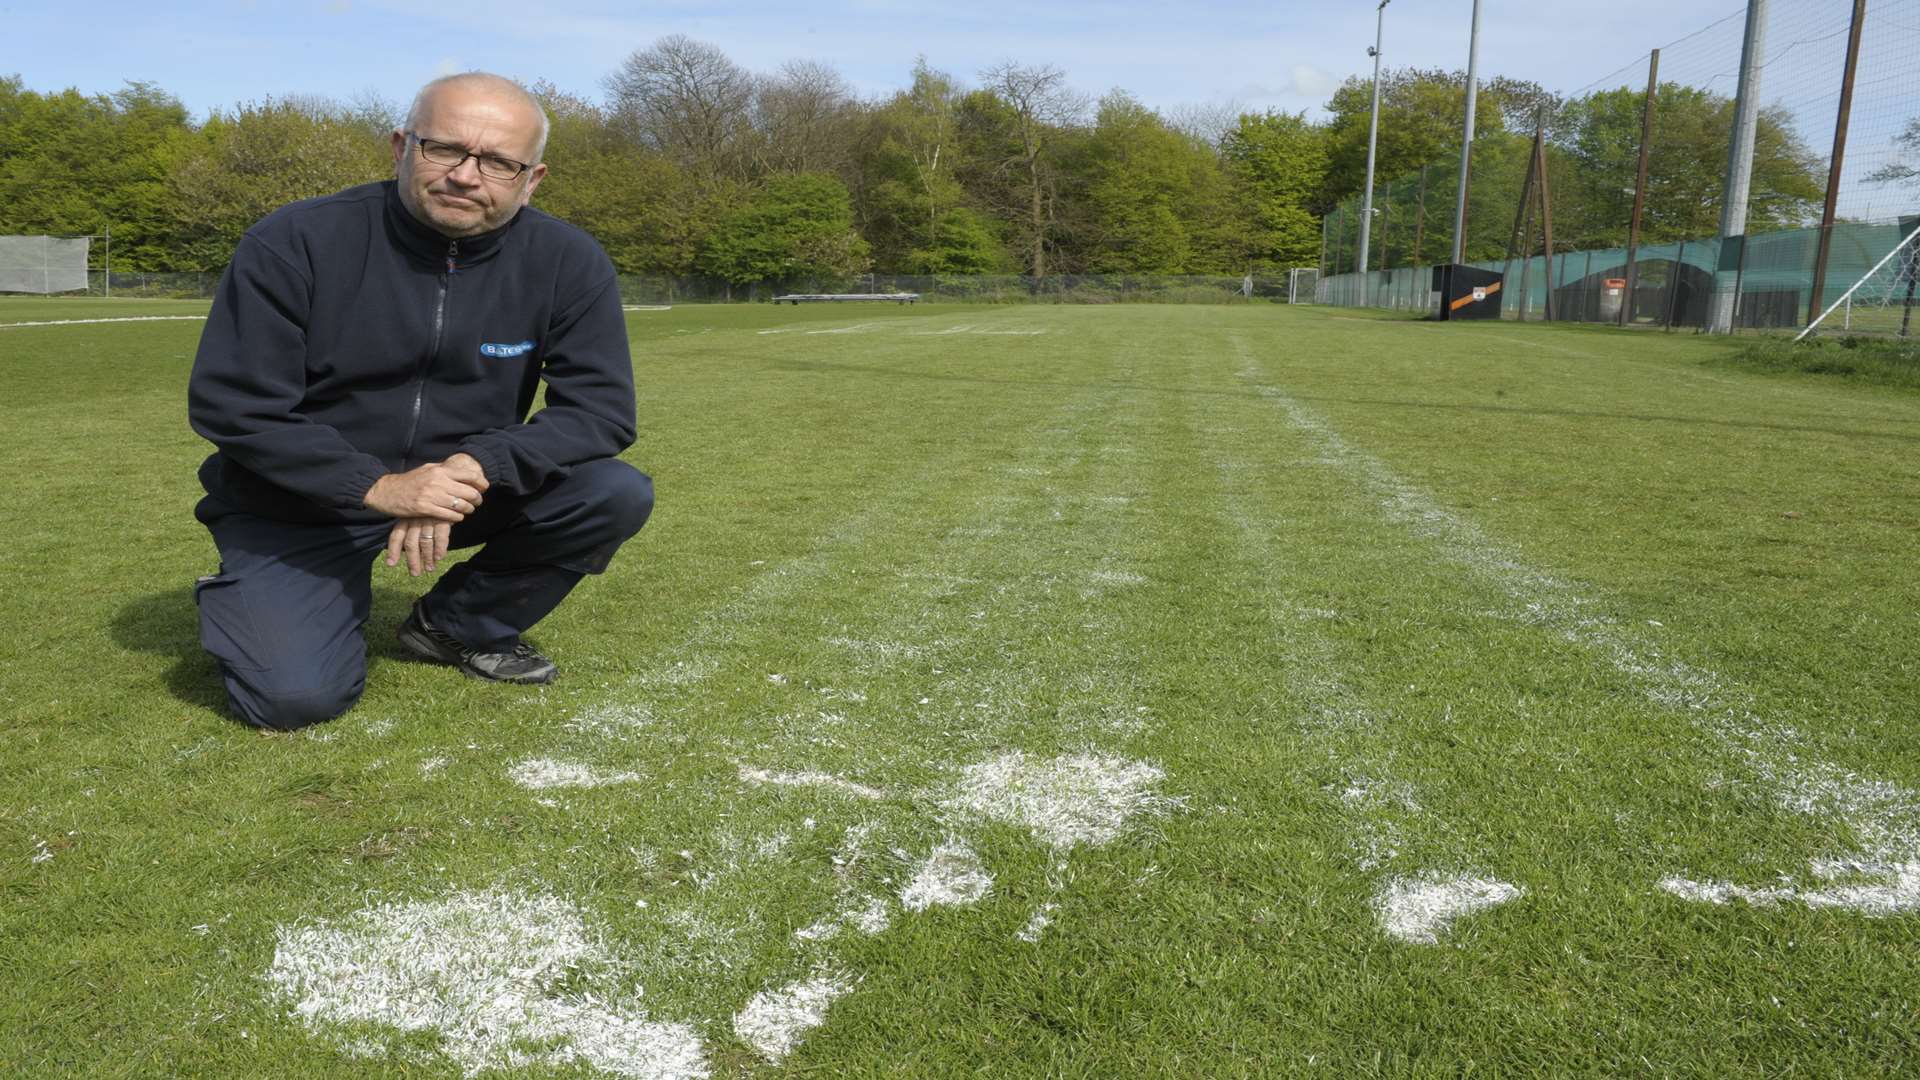 Richard Cross with paint the vandals threw on the pitch.